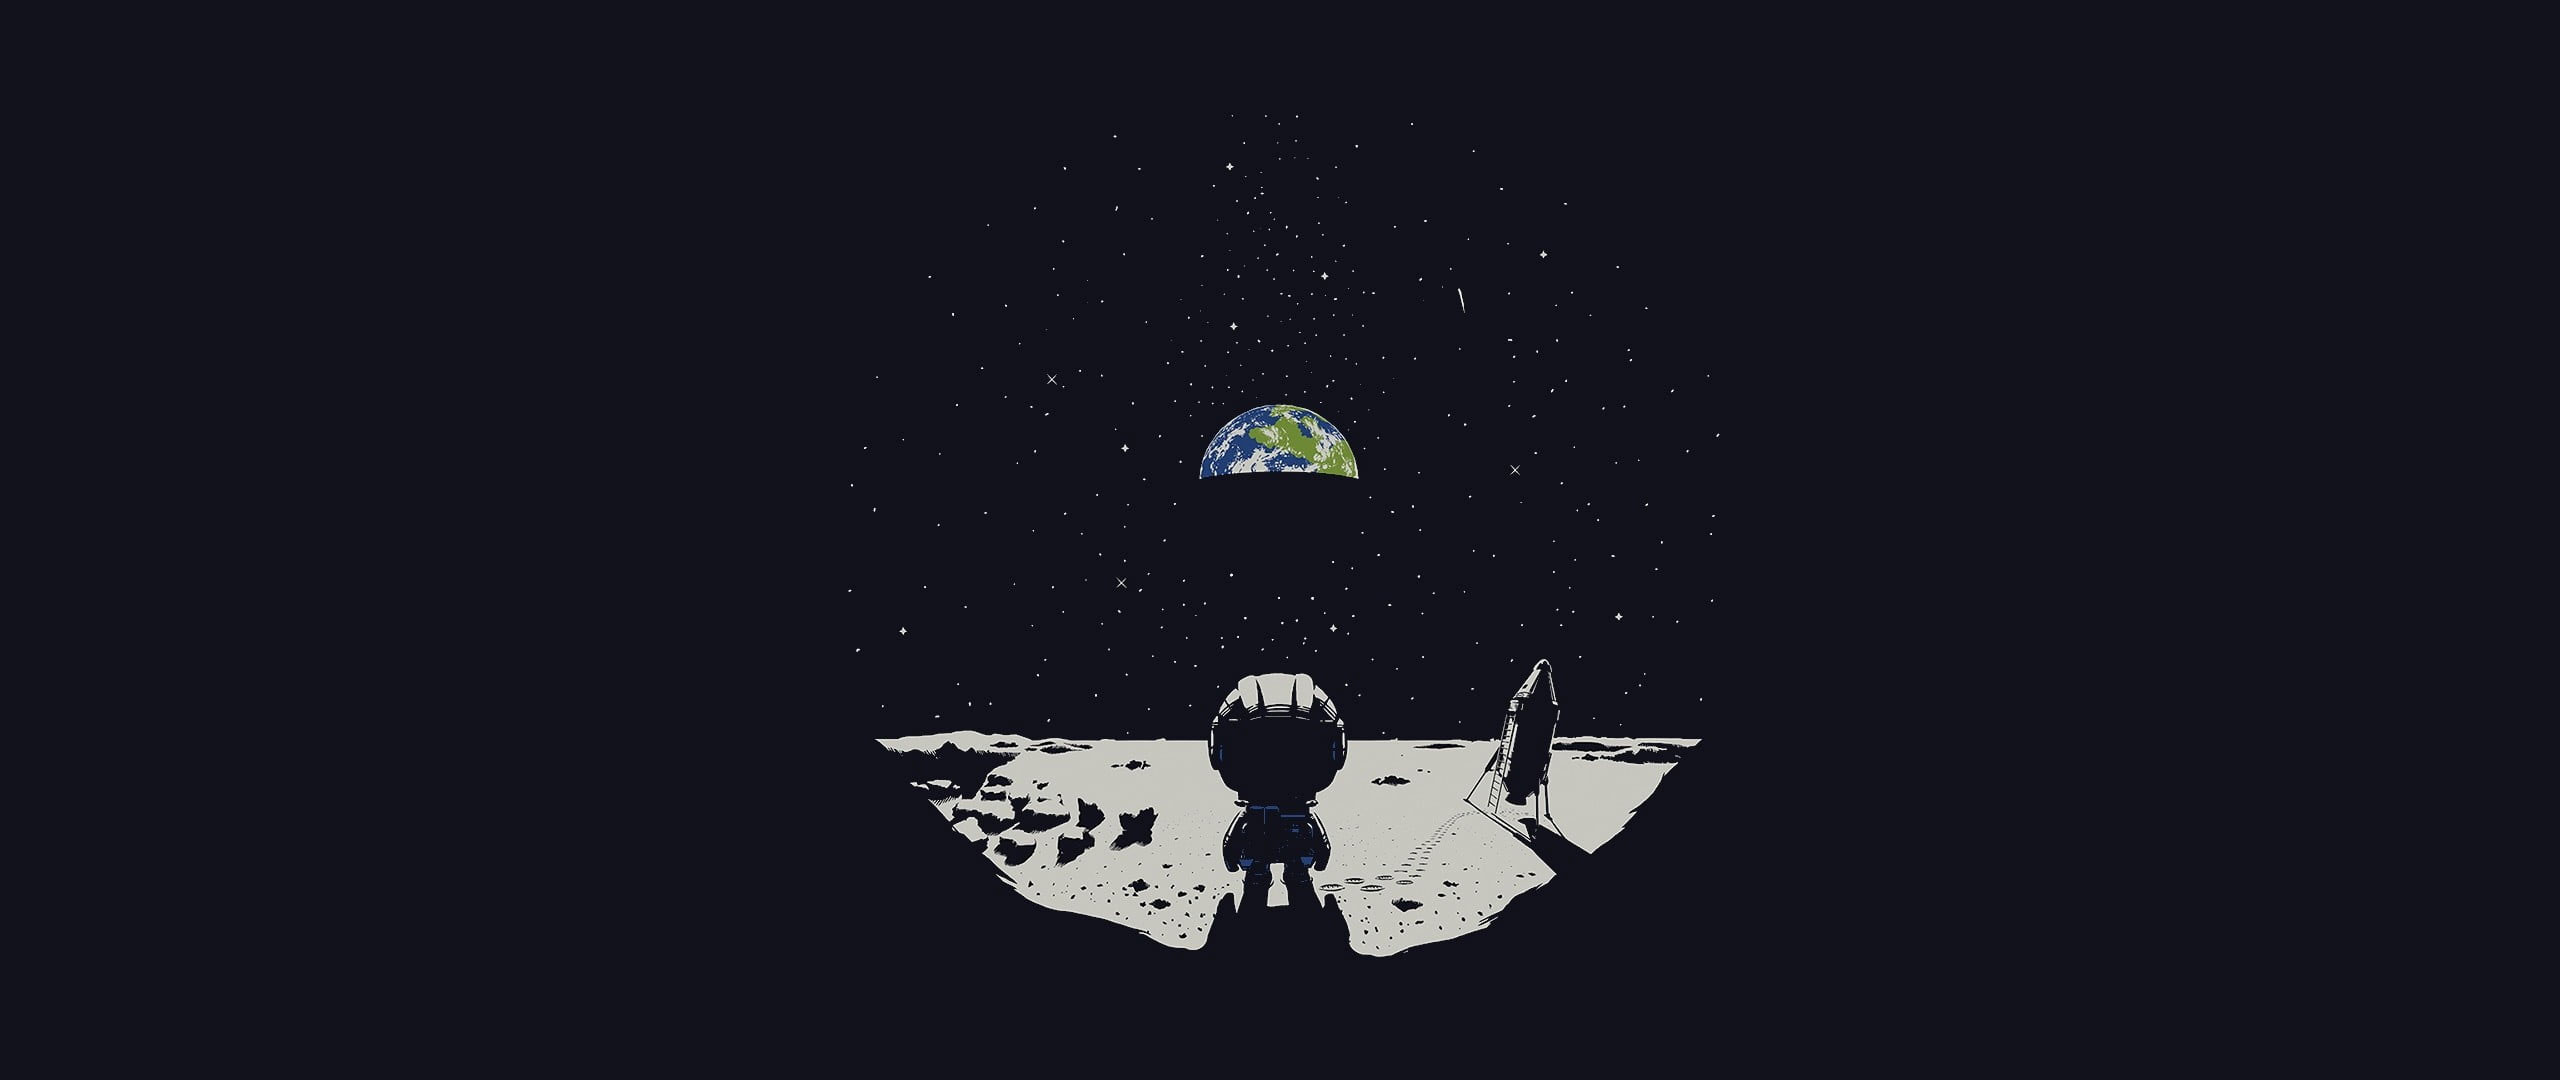 Astronaut on outer space illustration, ultrawide, Moon, Earth